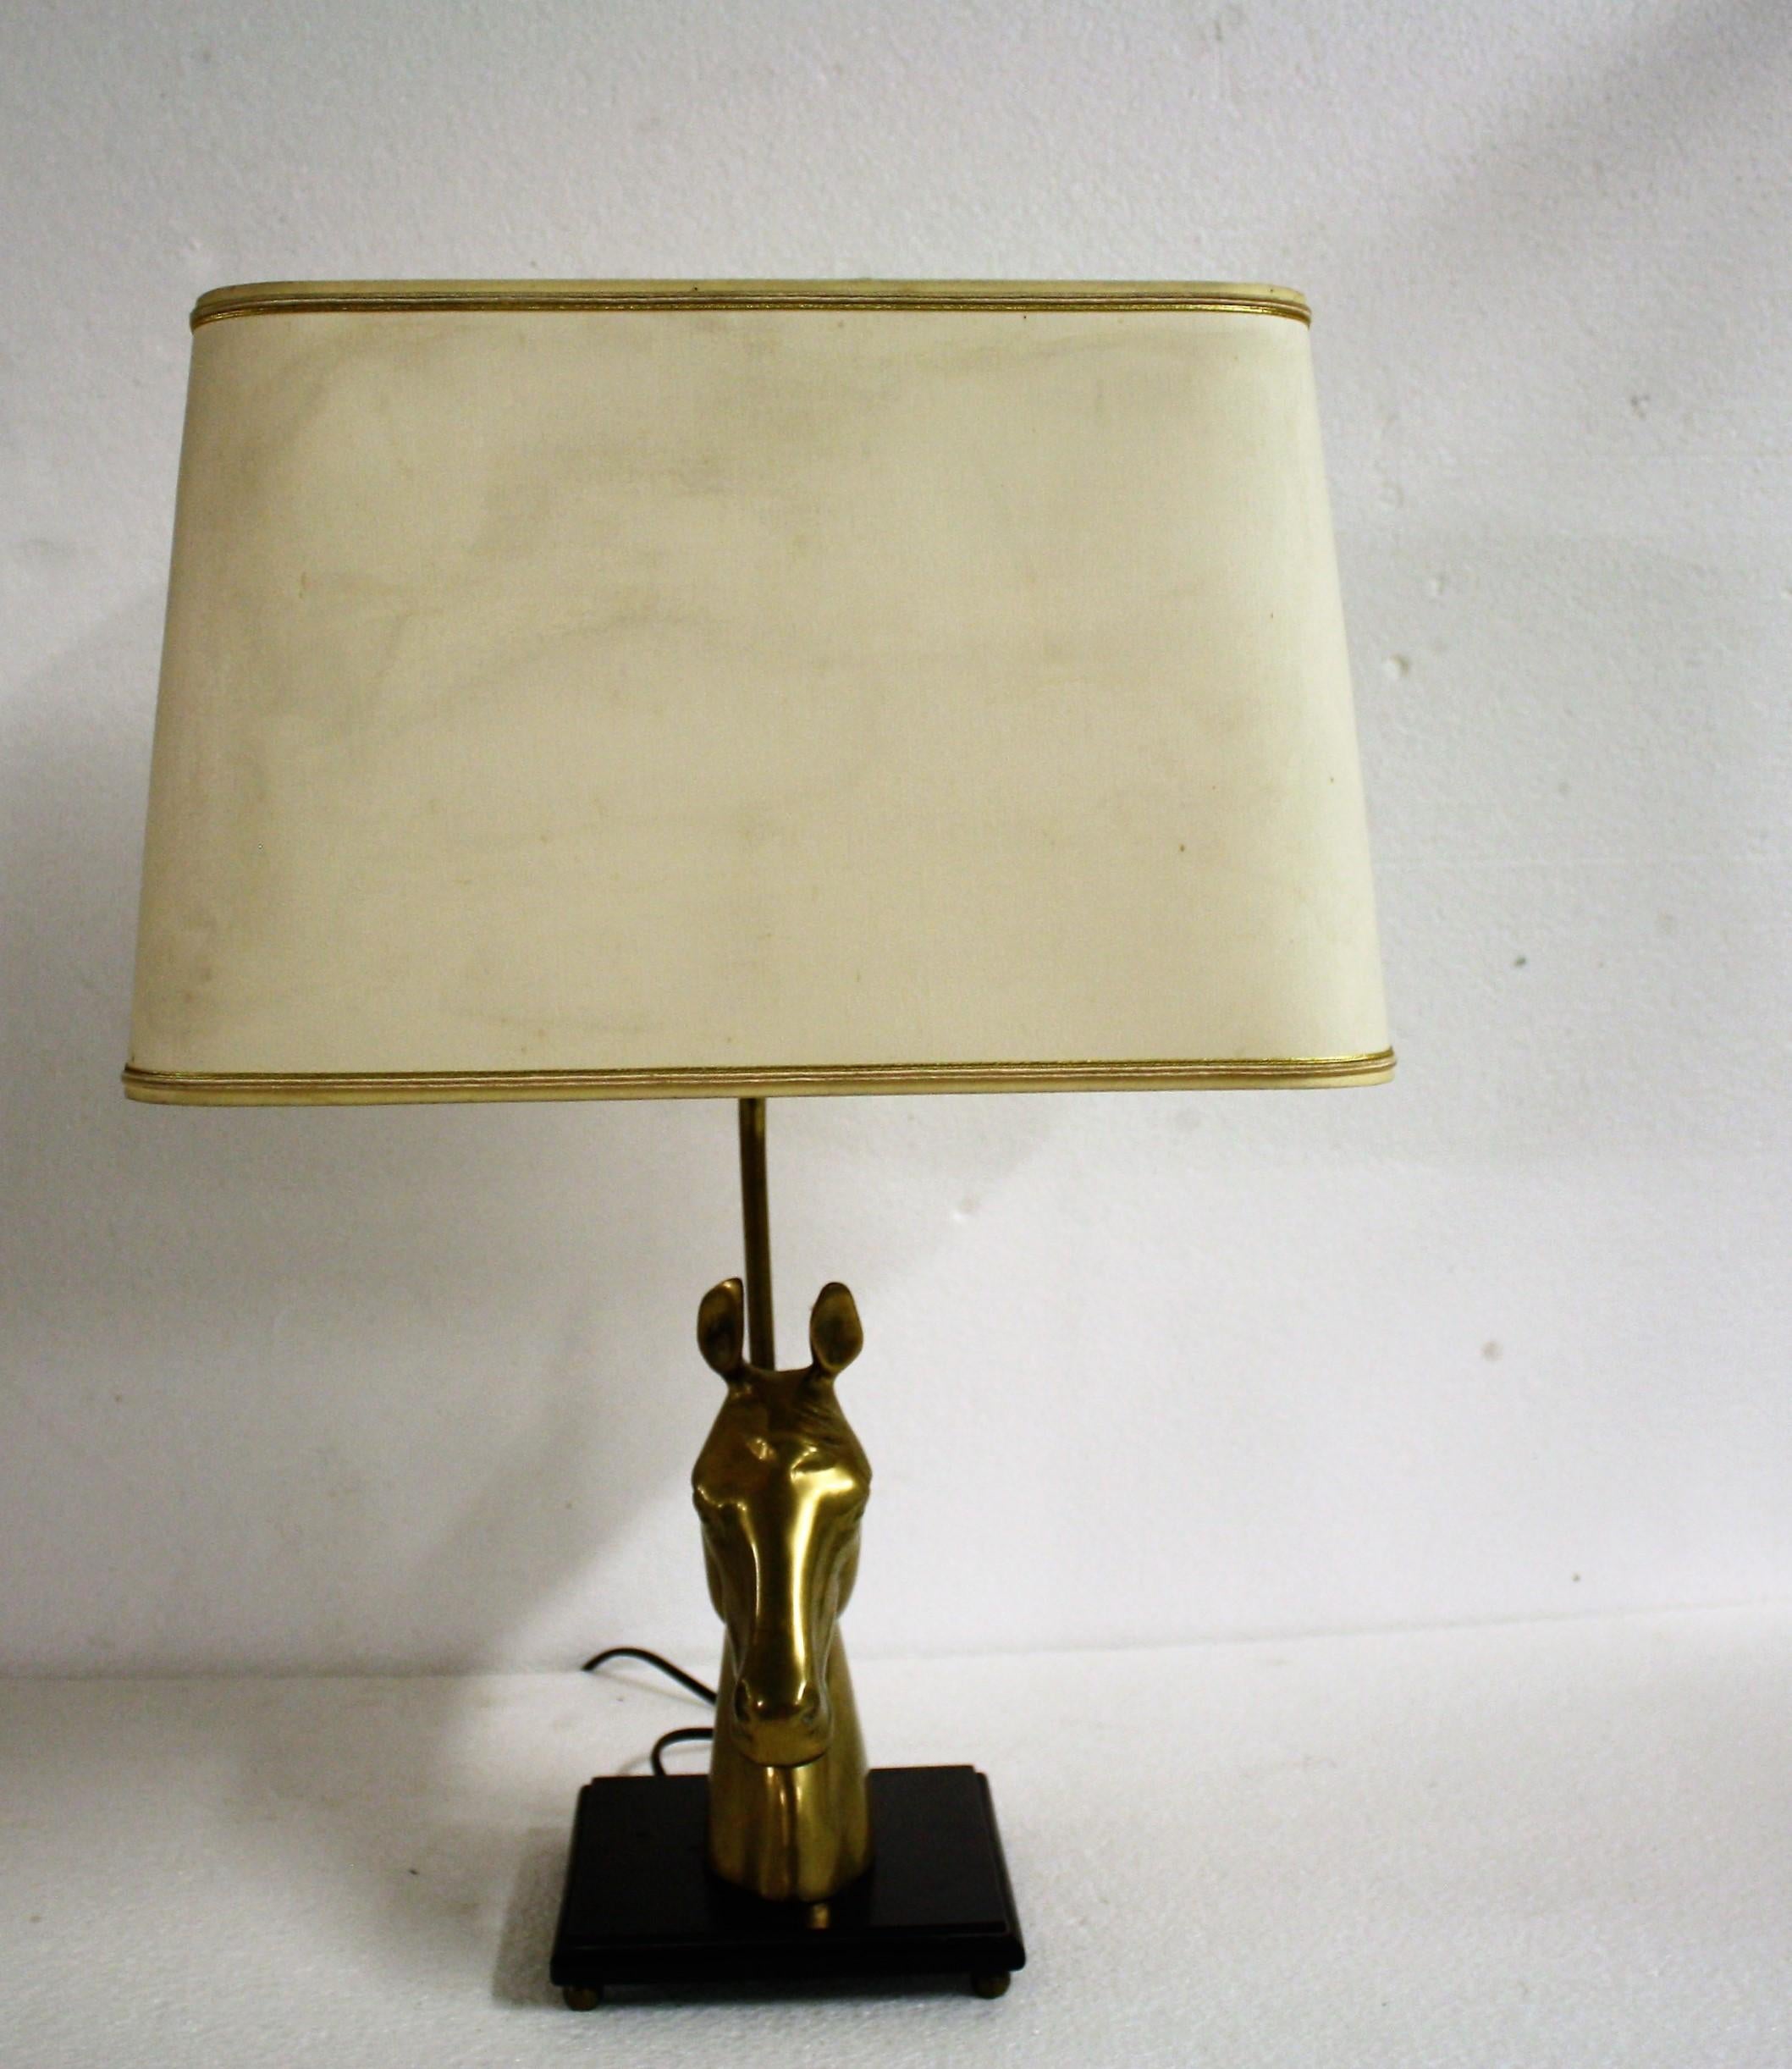 Brass horse head table lamp in the style of Maison Jansen.

The brass horse head is mounted on a wooden base and finished with a period fabric shade.

Stylish table lamp with a luxurious appeal.

The height of the lampshade is